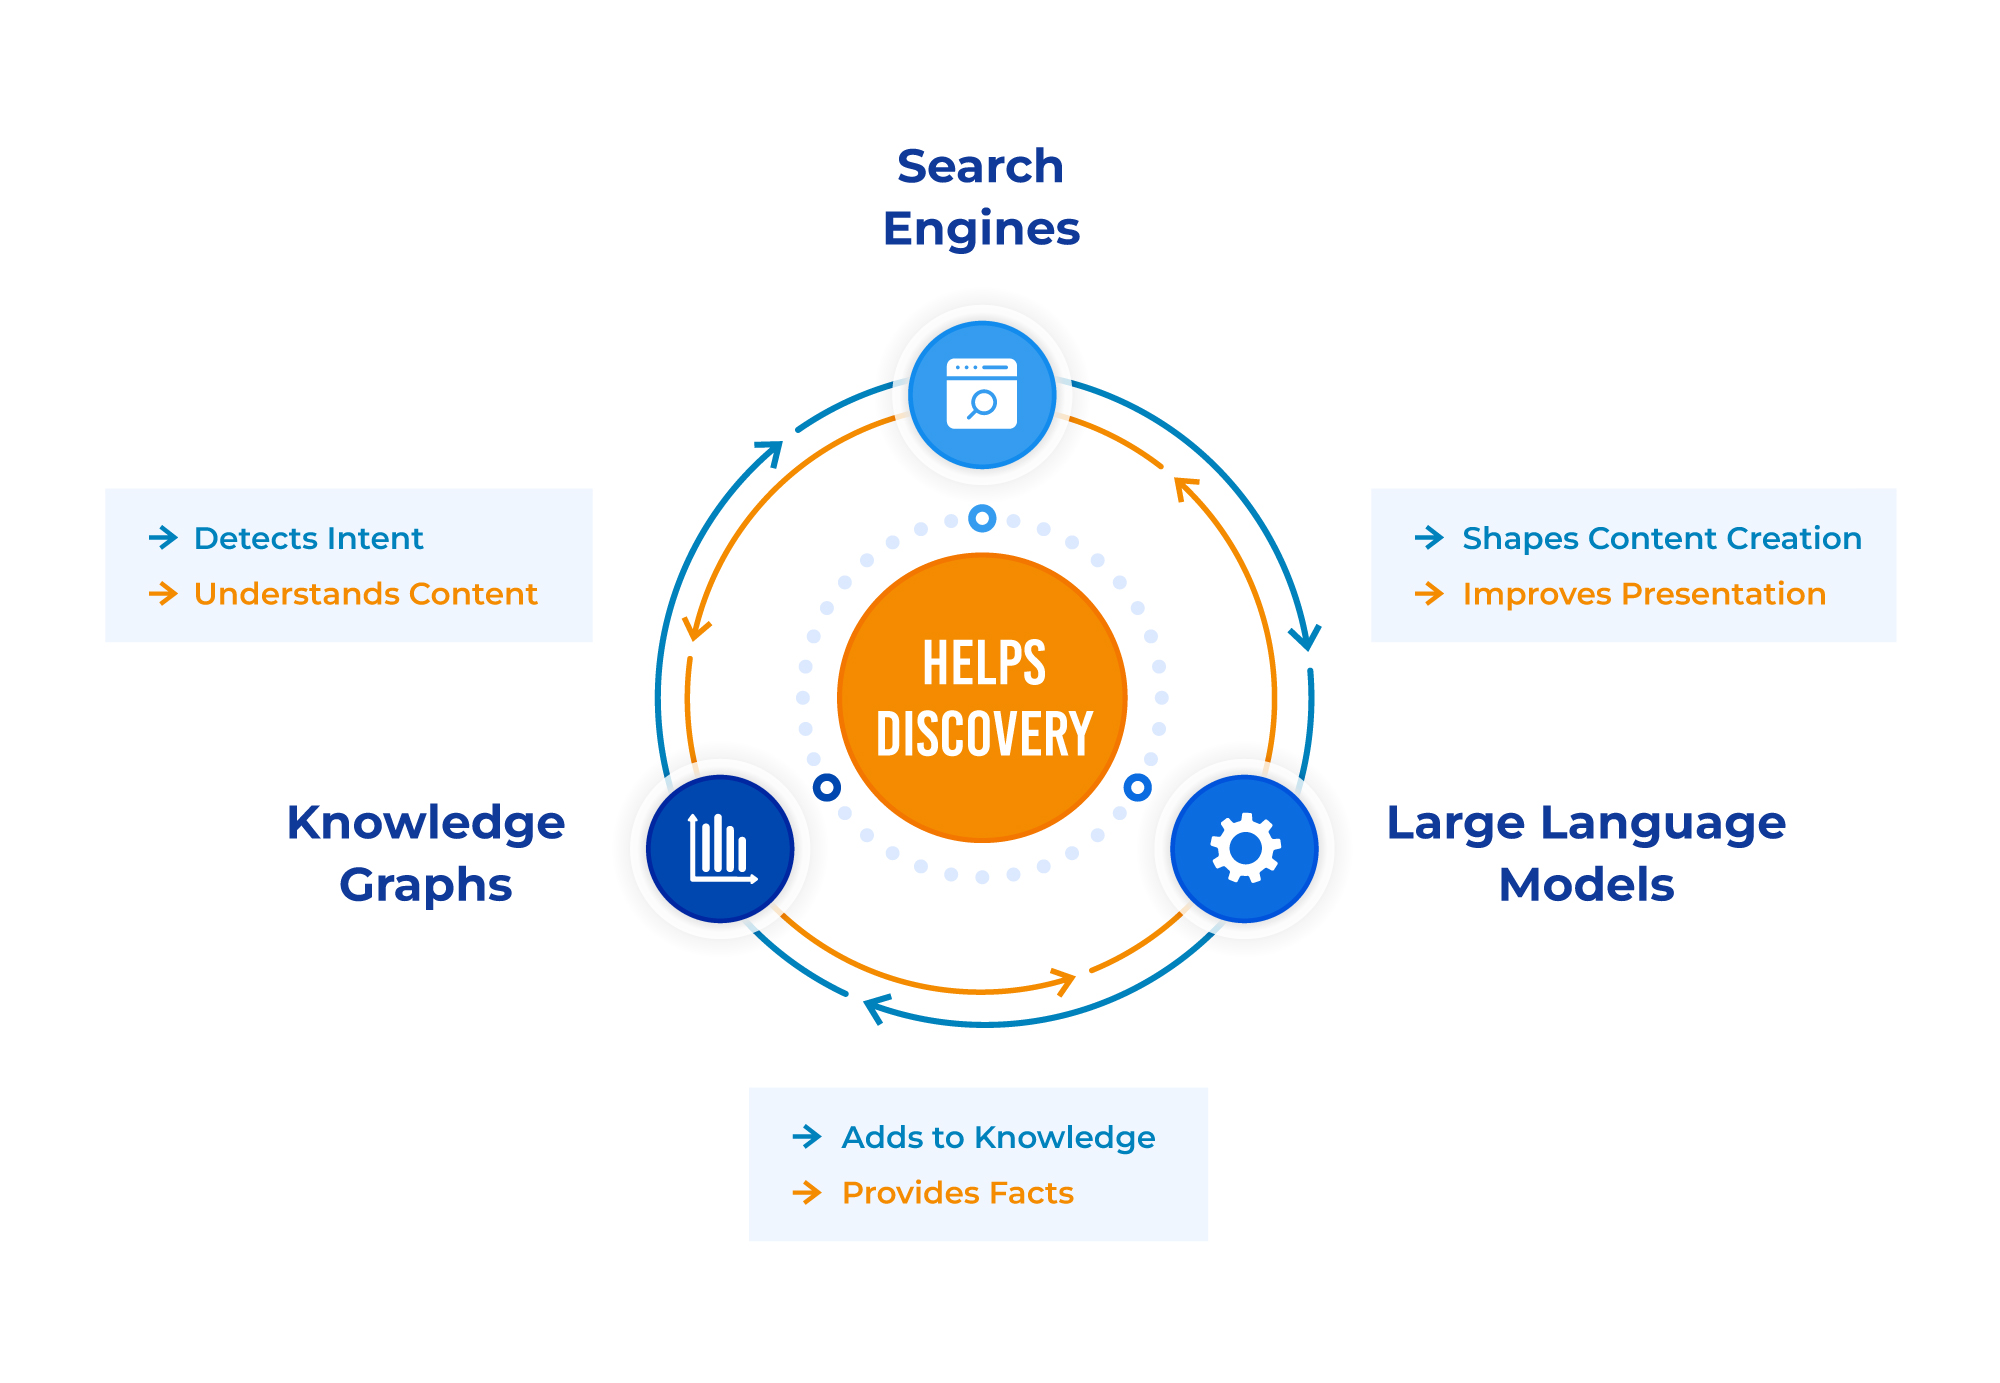 LLMs and Knowledge graph